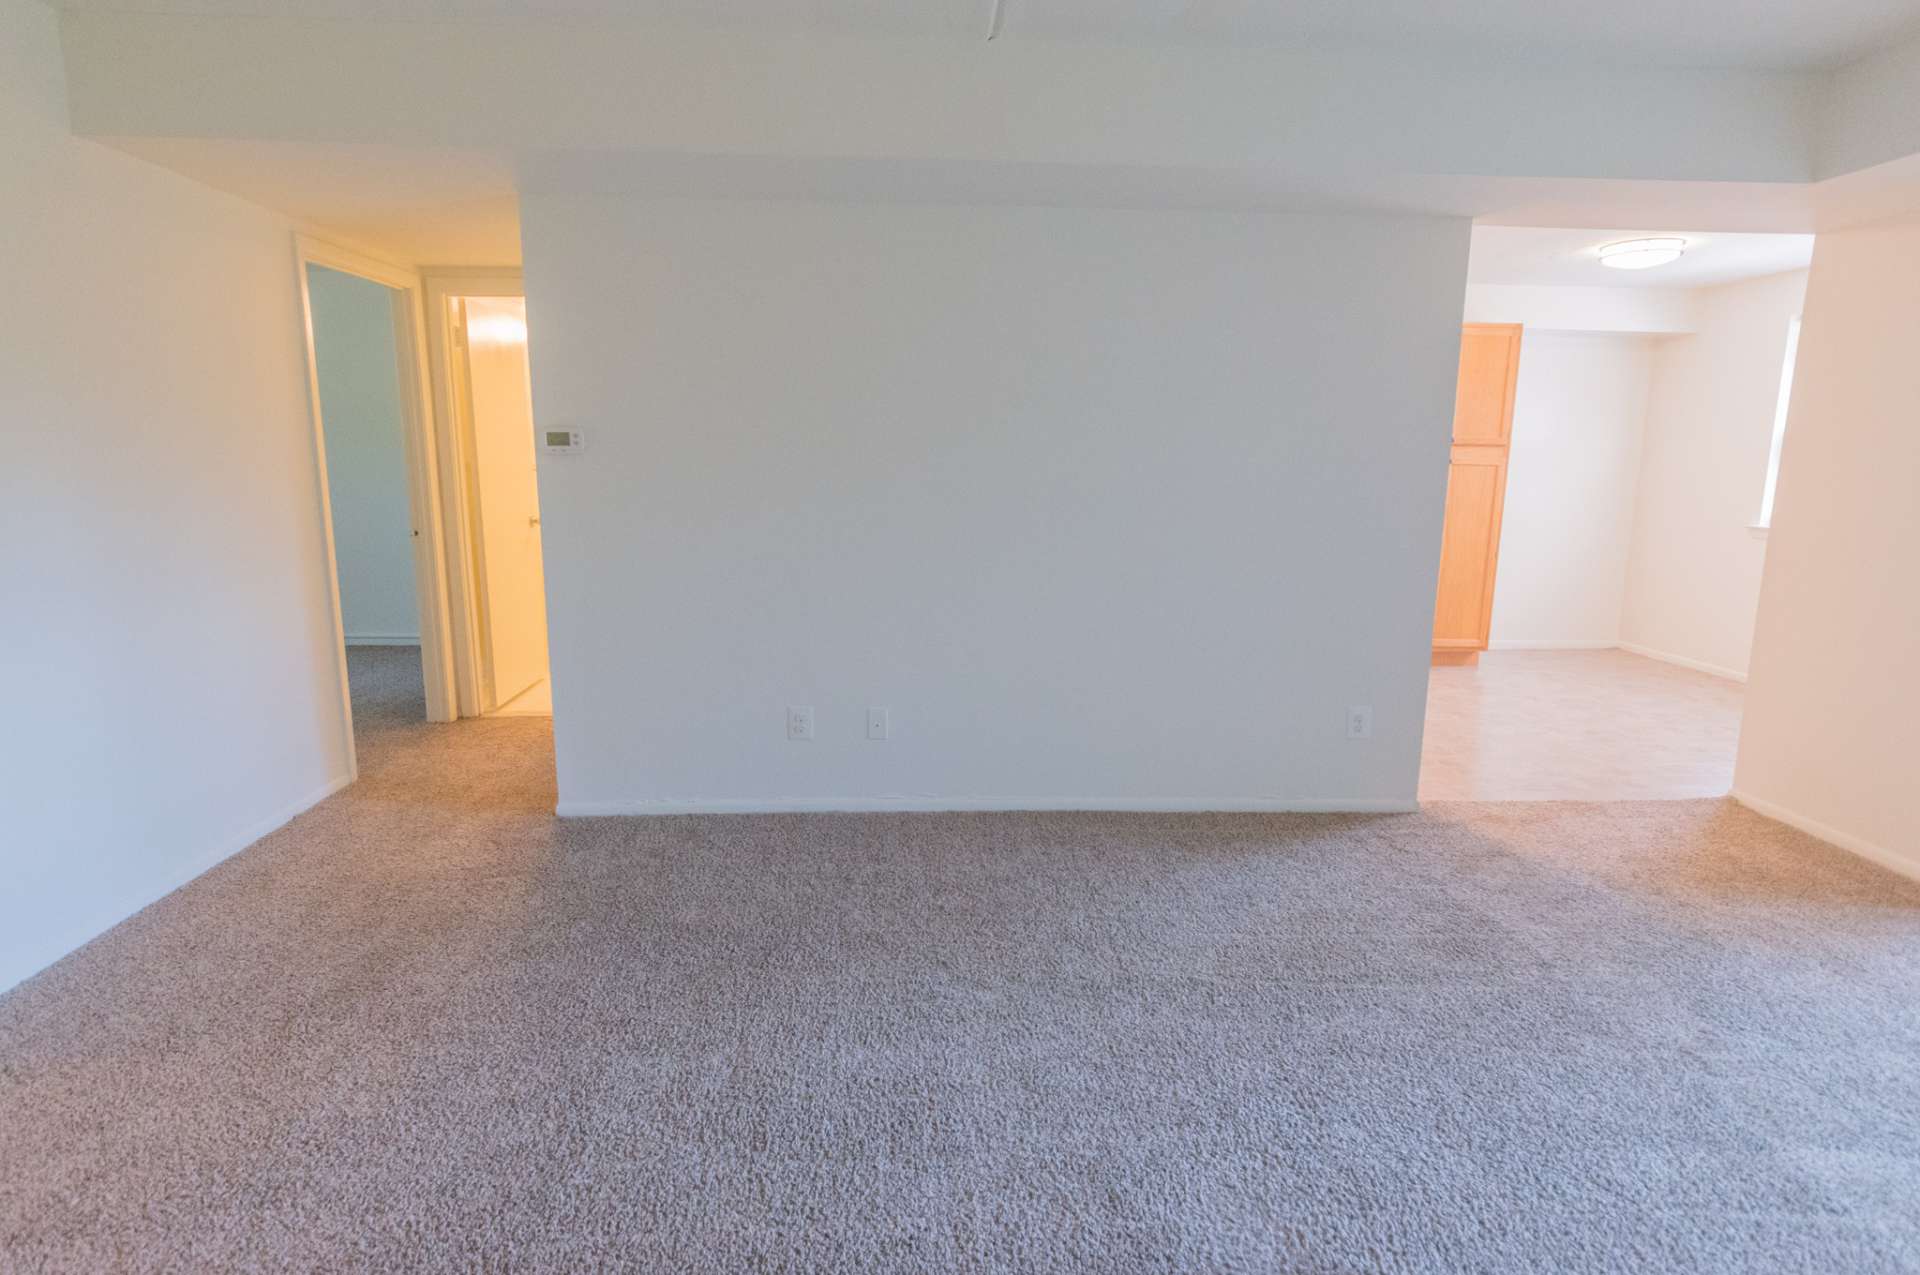 Willow Run Apartments living area with carpeting and doorway leading to the kitchen